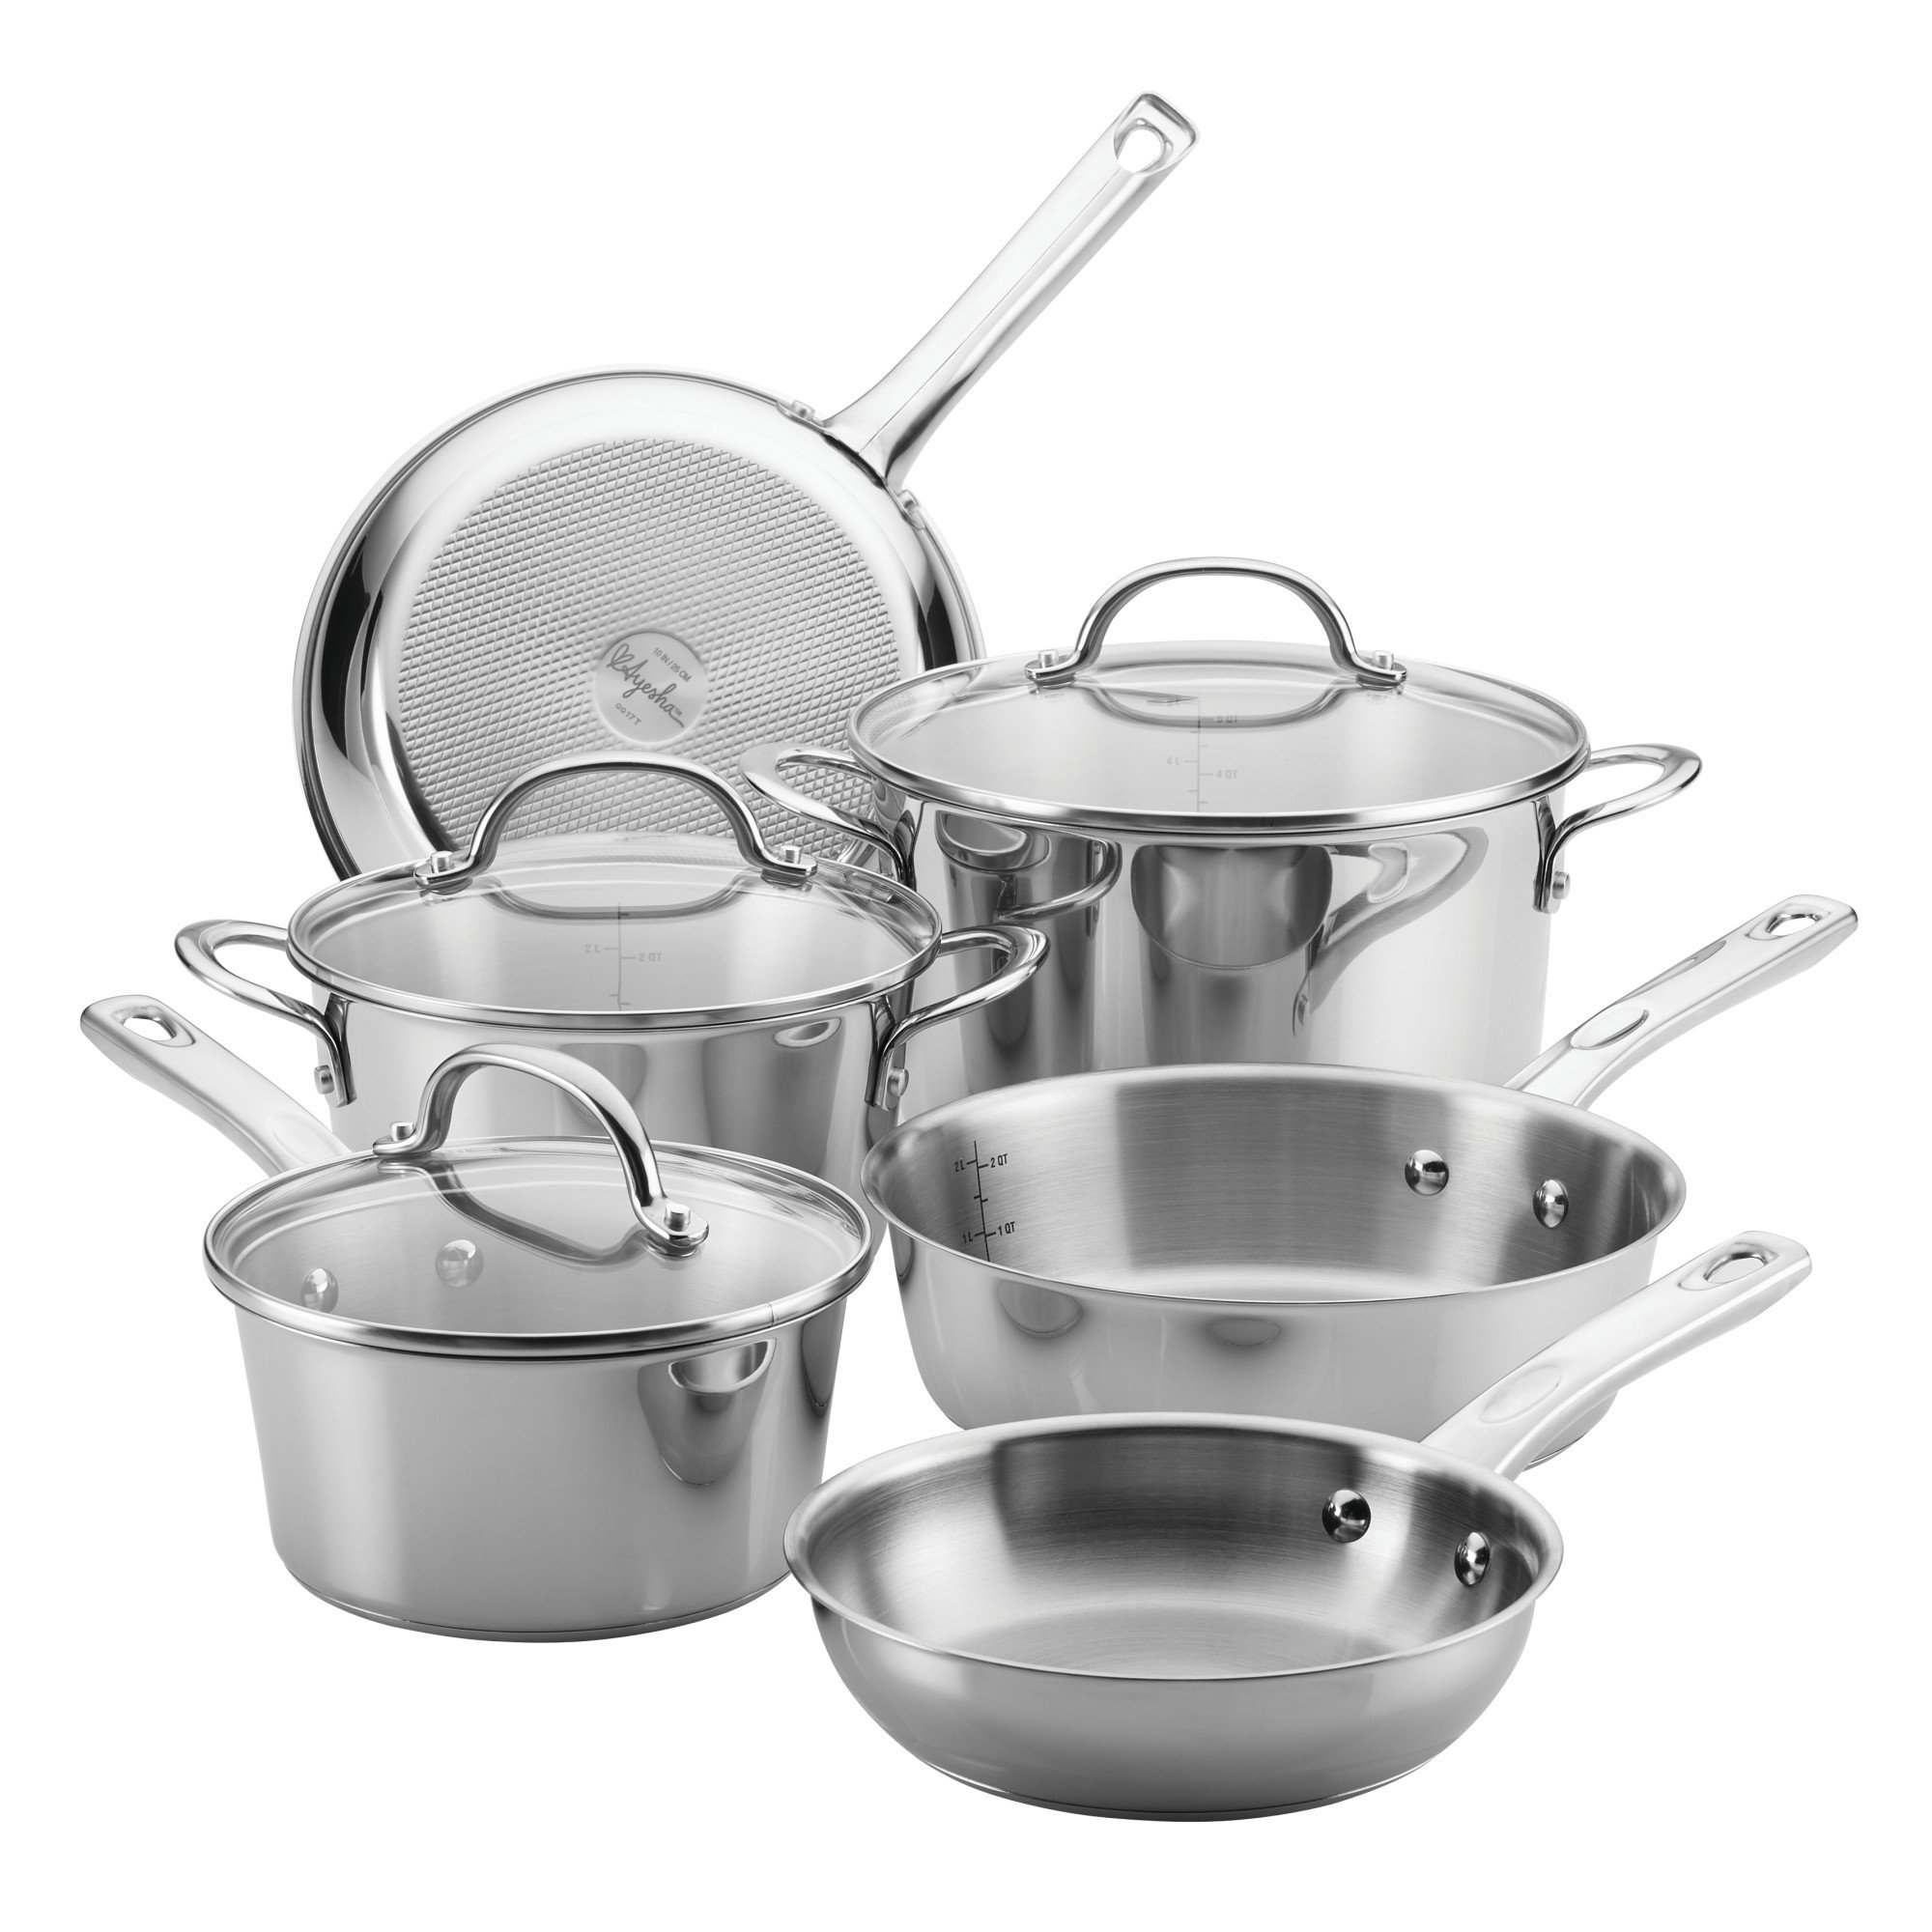 Ayesha Curry Home Collection Nonstick Cookware Pots and Pans Set, Includes  Cooking Utensils - 12 Piece & Reviews